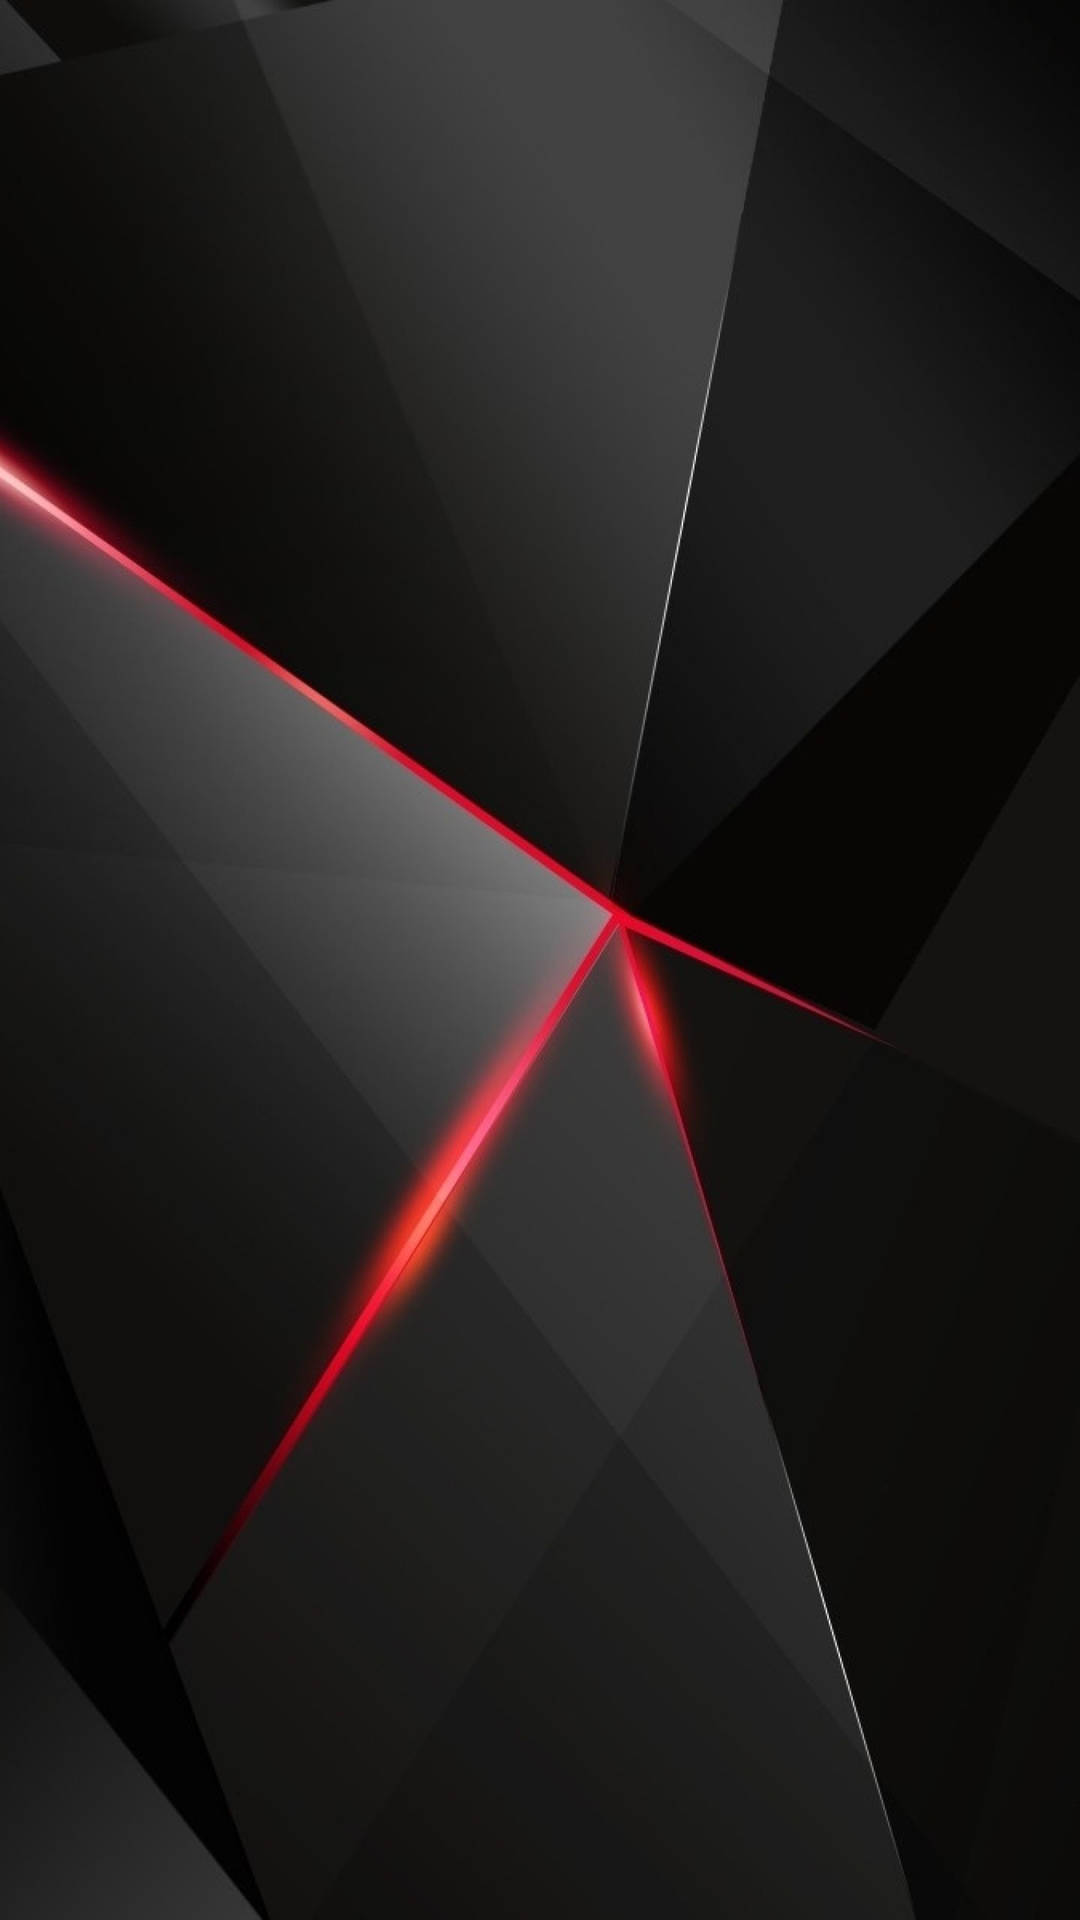 Sophisticated Pure Black Hd Phone Wallpaper